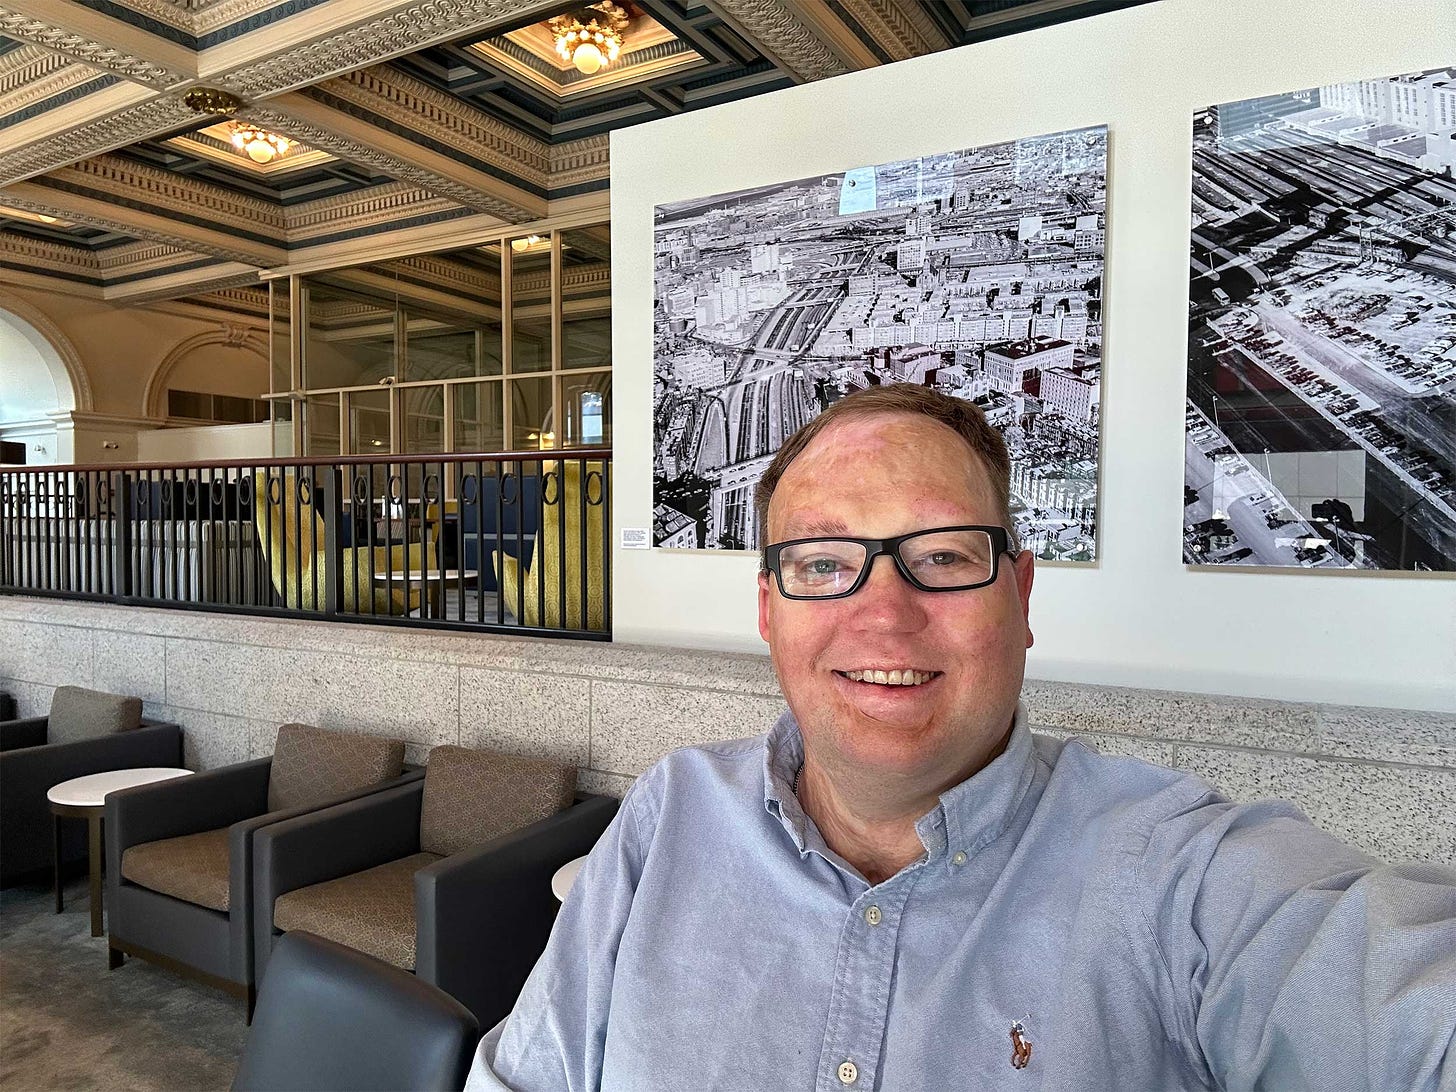 Selfie of John in the Amtrak lounge at Boston South Station, which has an ornate and timeless ceiling and a variety of seating areas.